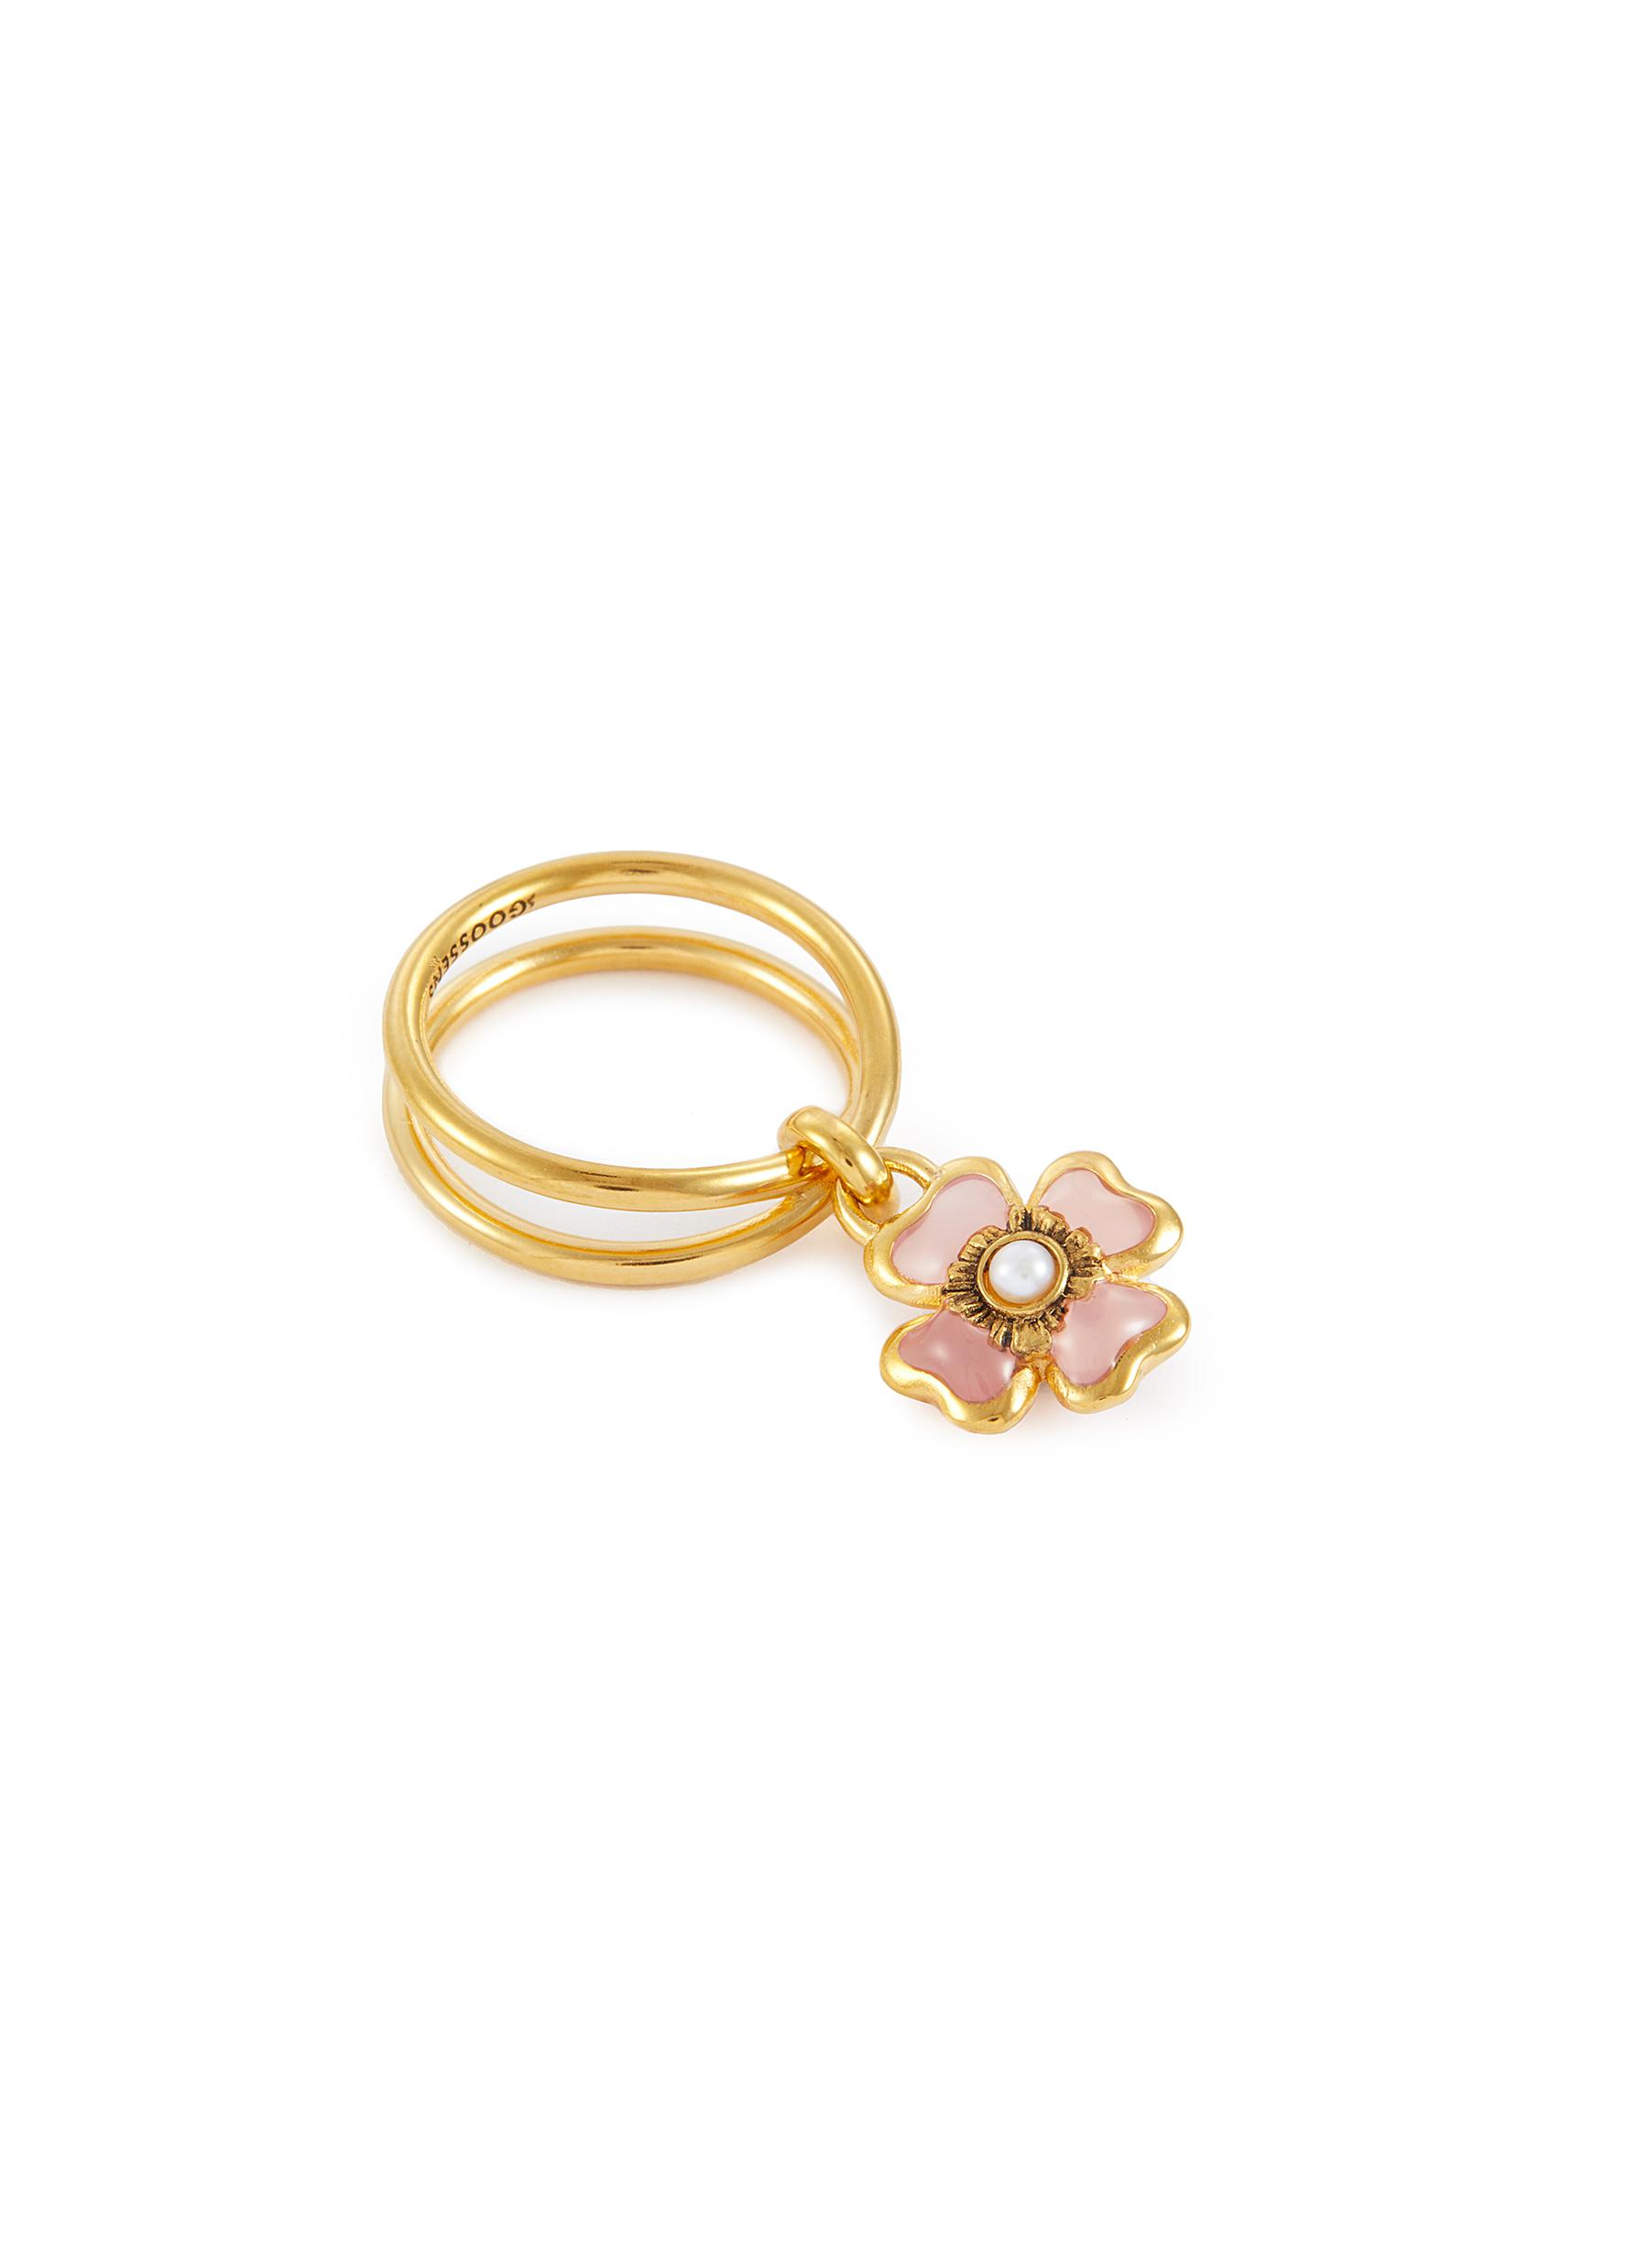 24k Gold Plated Clover Ring